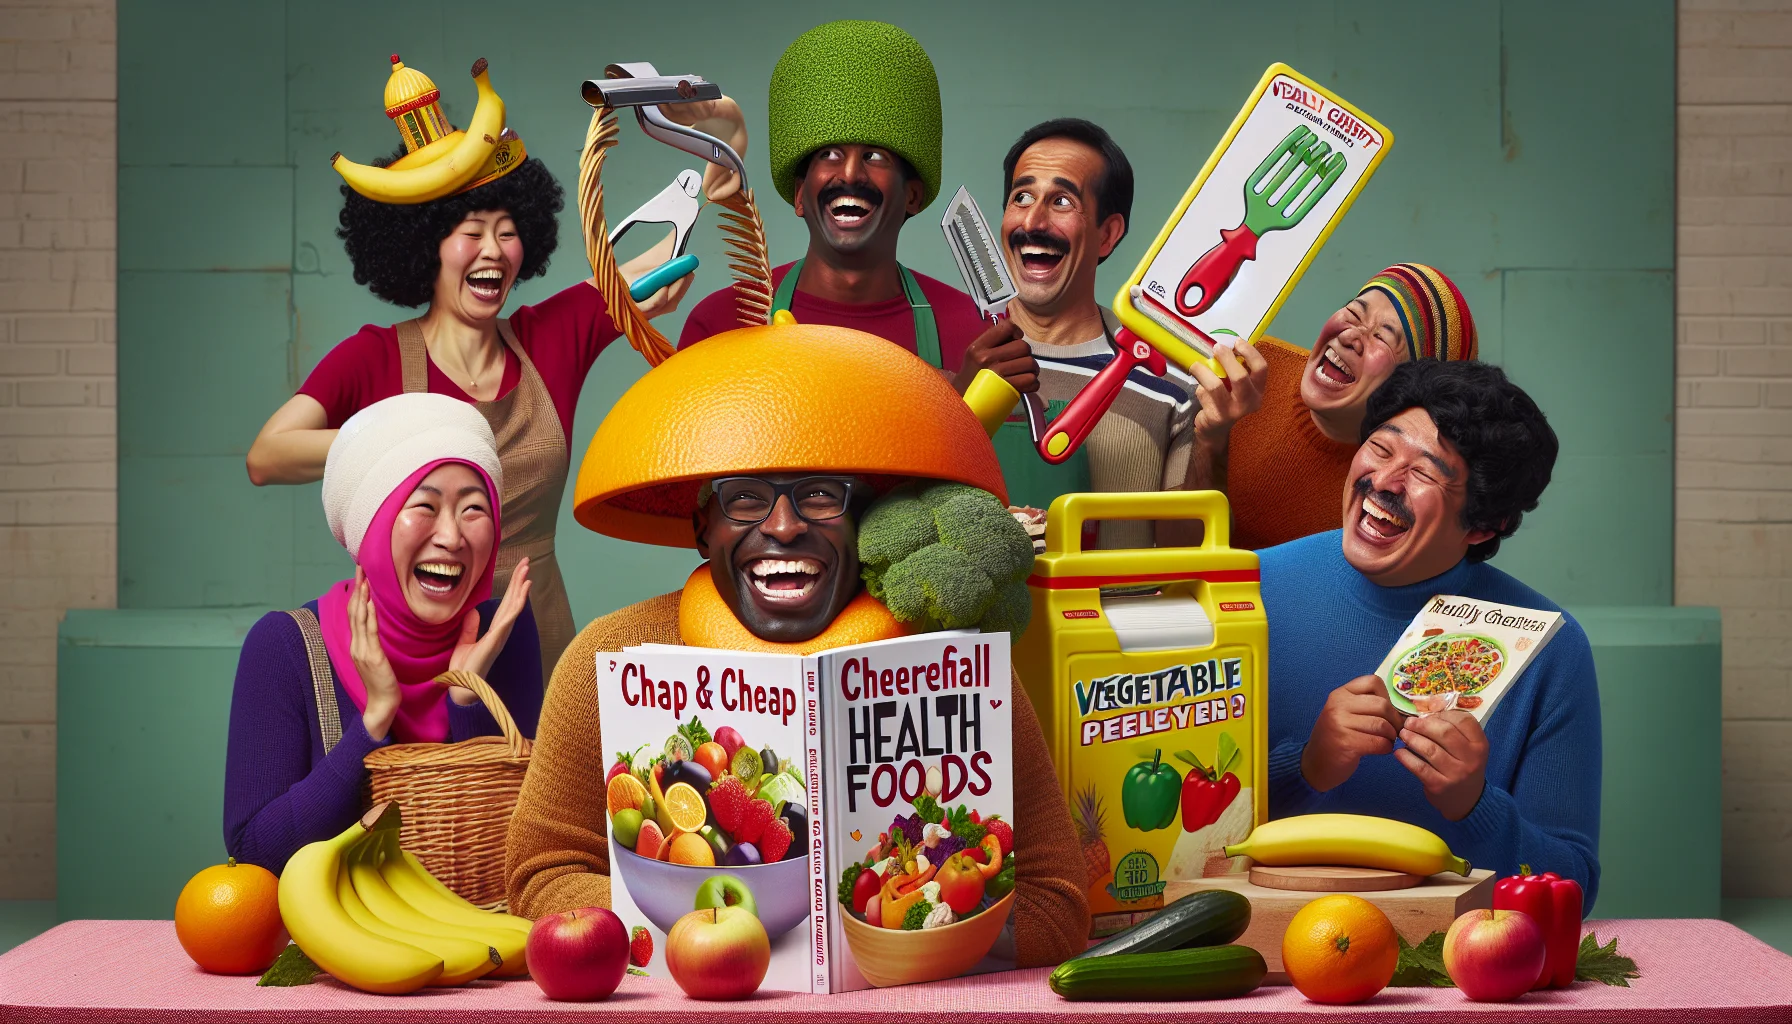 A humorous and realistic depiction of an array of budget-friendly gift items, all focused on promoting a healthy lifestyle in an economical way. For instance, a real fruit basket doubling as a funky hat on a laughing South Asian man, a vegetable peeler disguised as a fashionable accessory worn by a Middle Eastern woman and a cookbook titled 'Cheap & Cheerful Health Foods' being read by a Black man with delight. The scene is lively, colorful, suggesting that giving and receiving 'hard-to-gift' health-centric items can be whimsically cost-effective and highly beneficial.